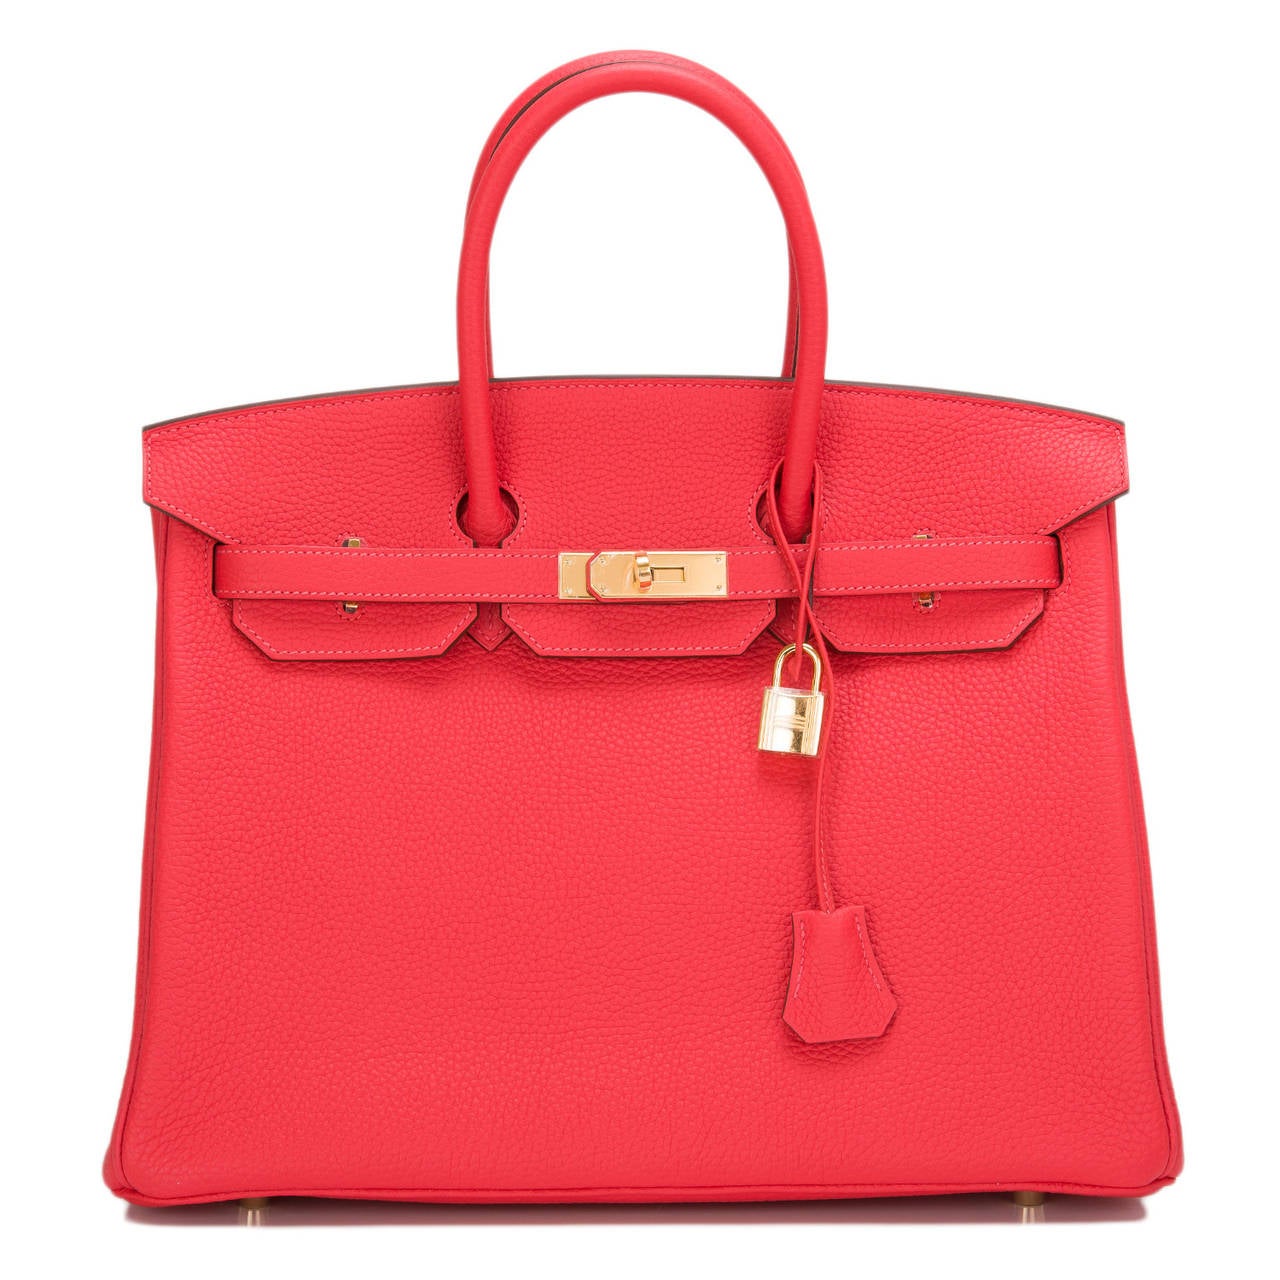 Hermes Rouge Pivoine Birkin 35cm in togo (bull) leather with gold hardware.

The Hermes Birkin is the most coveted and the hardest to acquire handbag in the world. Immediately recognizable by its shape, its thin straps with metal plates on the end